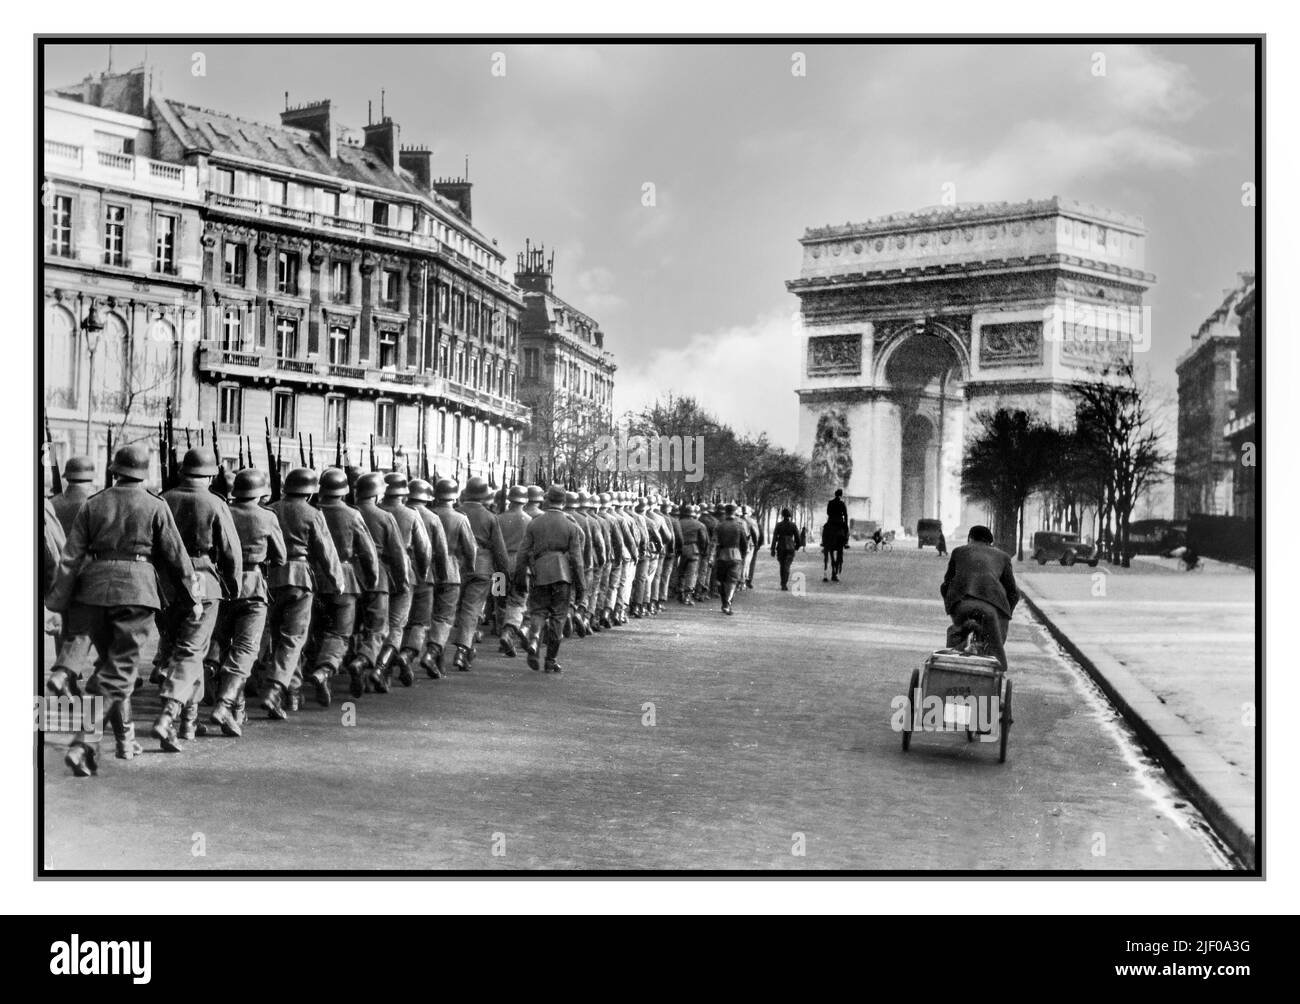 PARIS NAZI GERMANY OCCUPATION WW2  June 14, 1940, Nazi Wehrmacht troops march into Paris without a fight. It was declared an open city by the French government in order to avoid its destruction. Arc de Triomphe in background Paris France. World War II Second World War Stock Photo